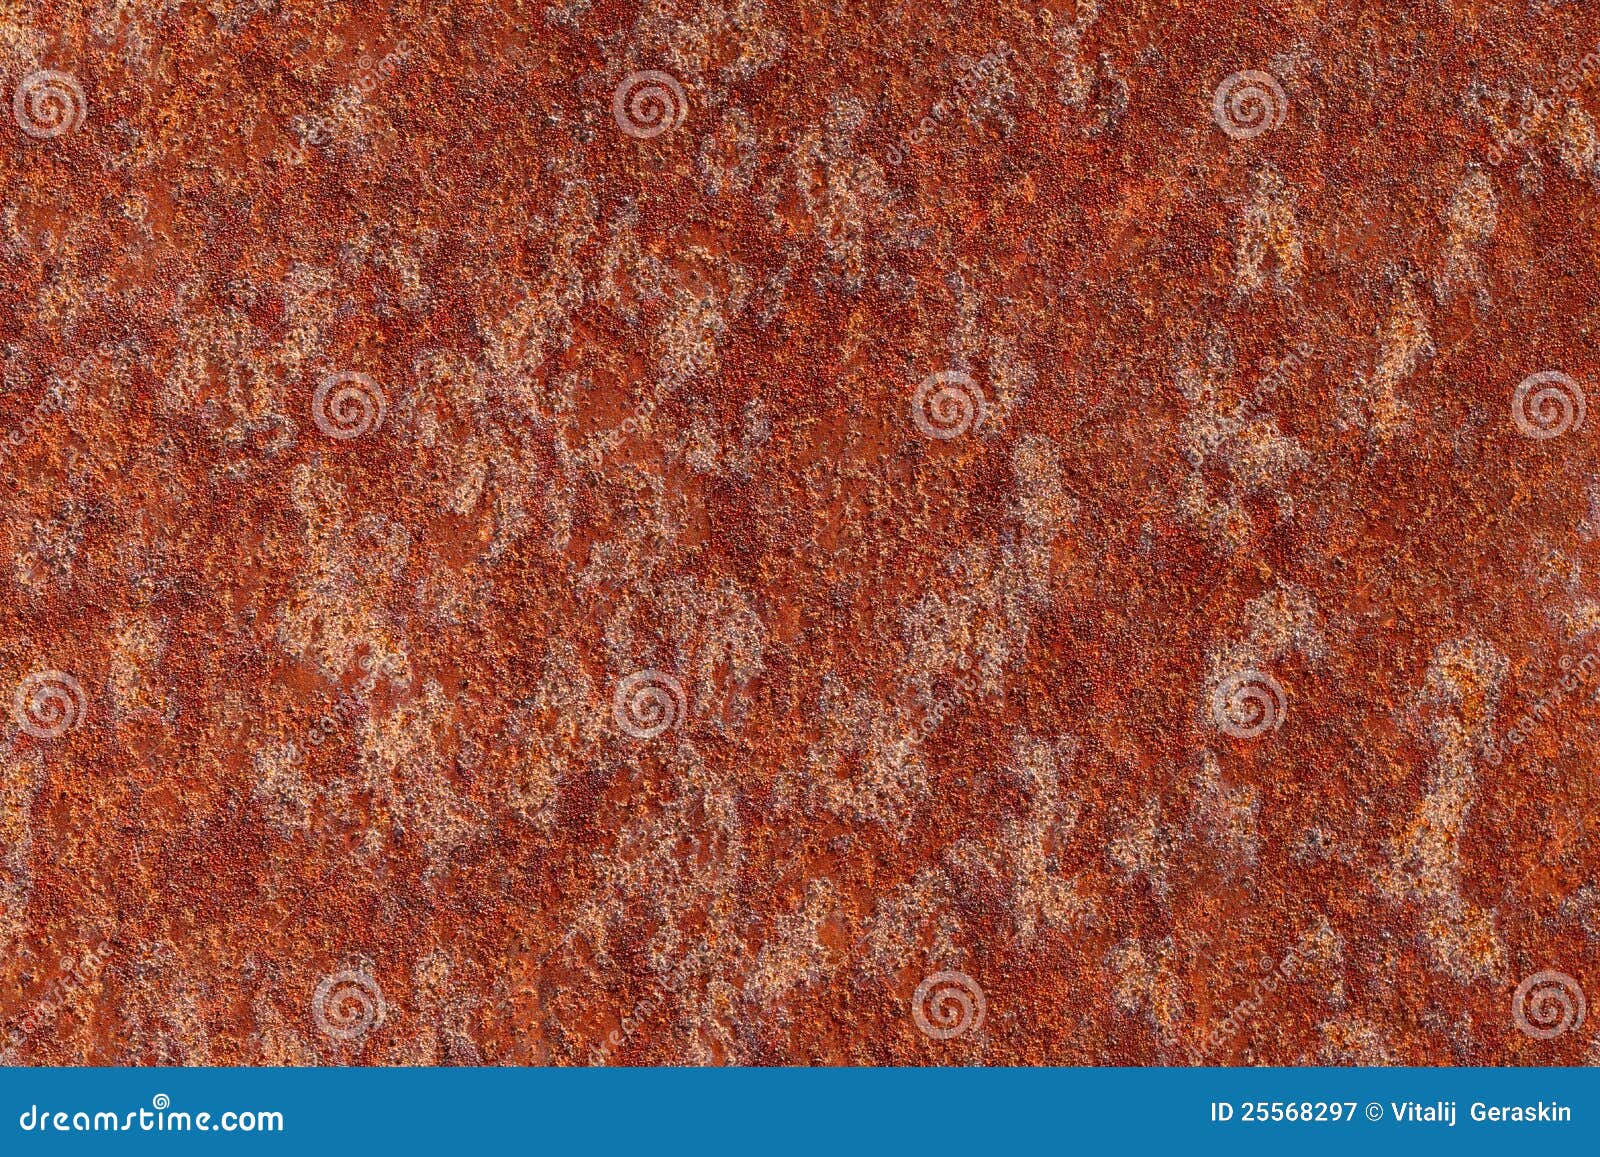 steel corrosion background